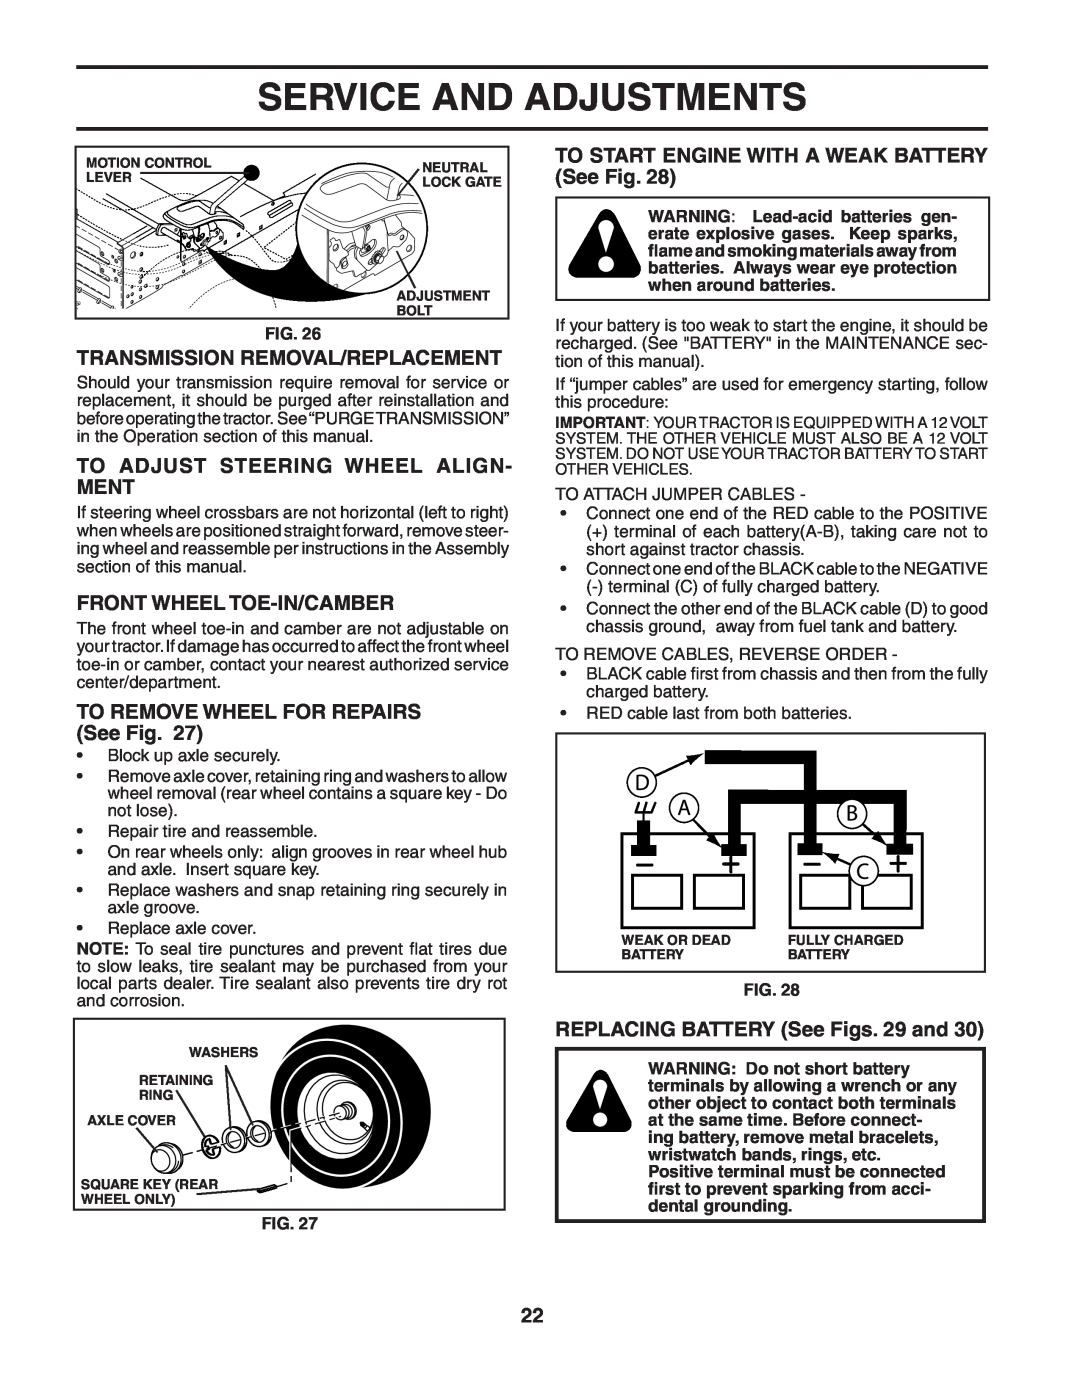 Poulan 190944 Transmission Removal/Replacement, To Adjust Steering Wheel Align- Ment, Front Wheel Toe-In/Camber 